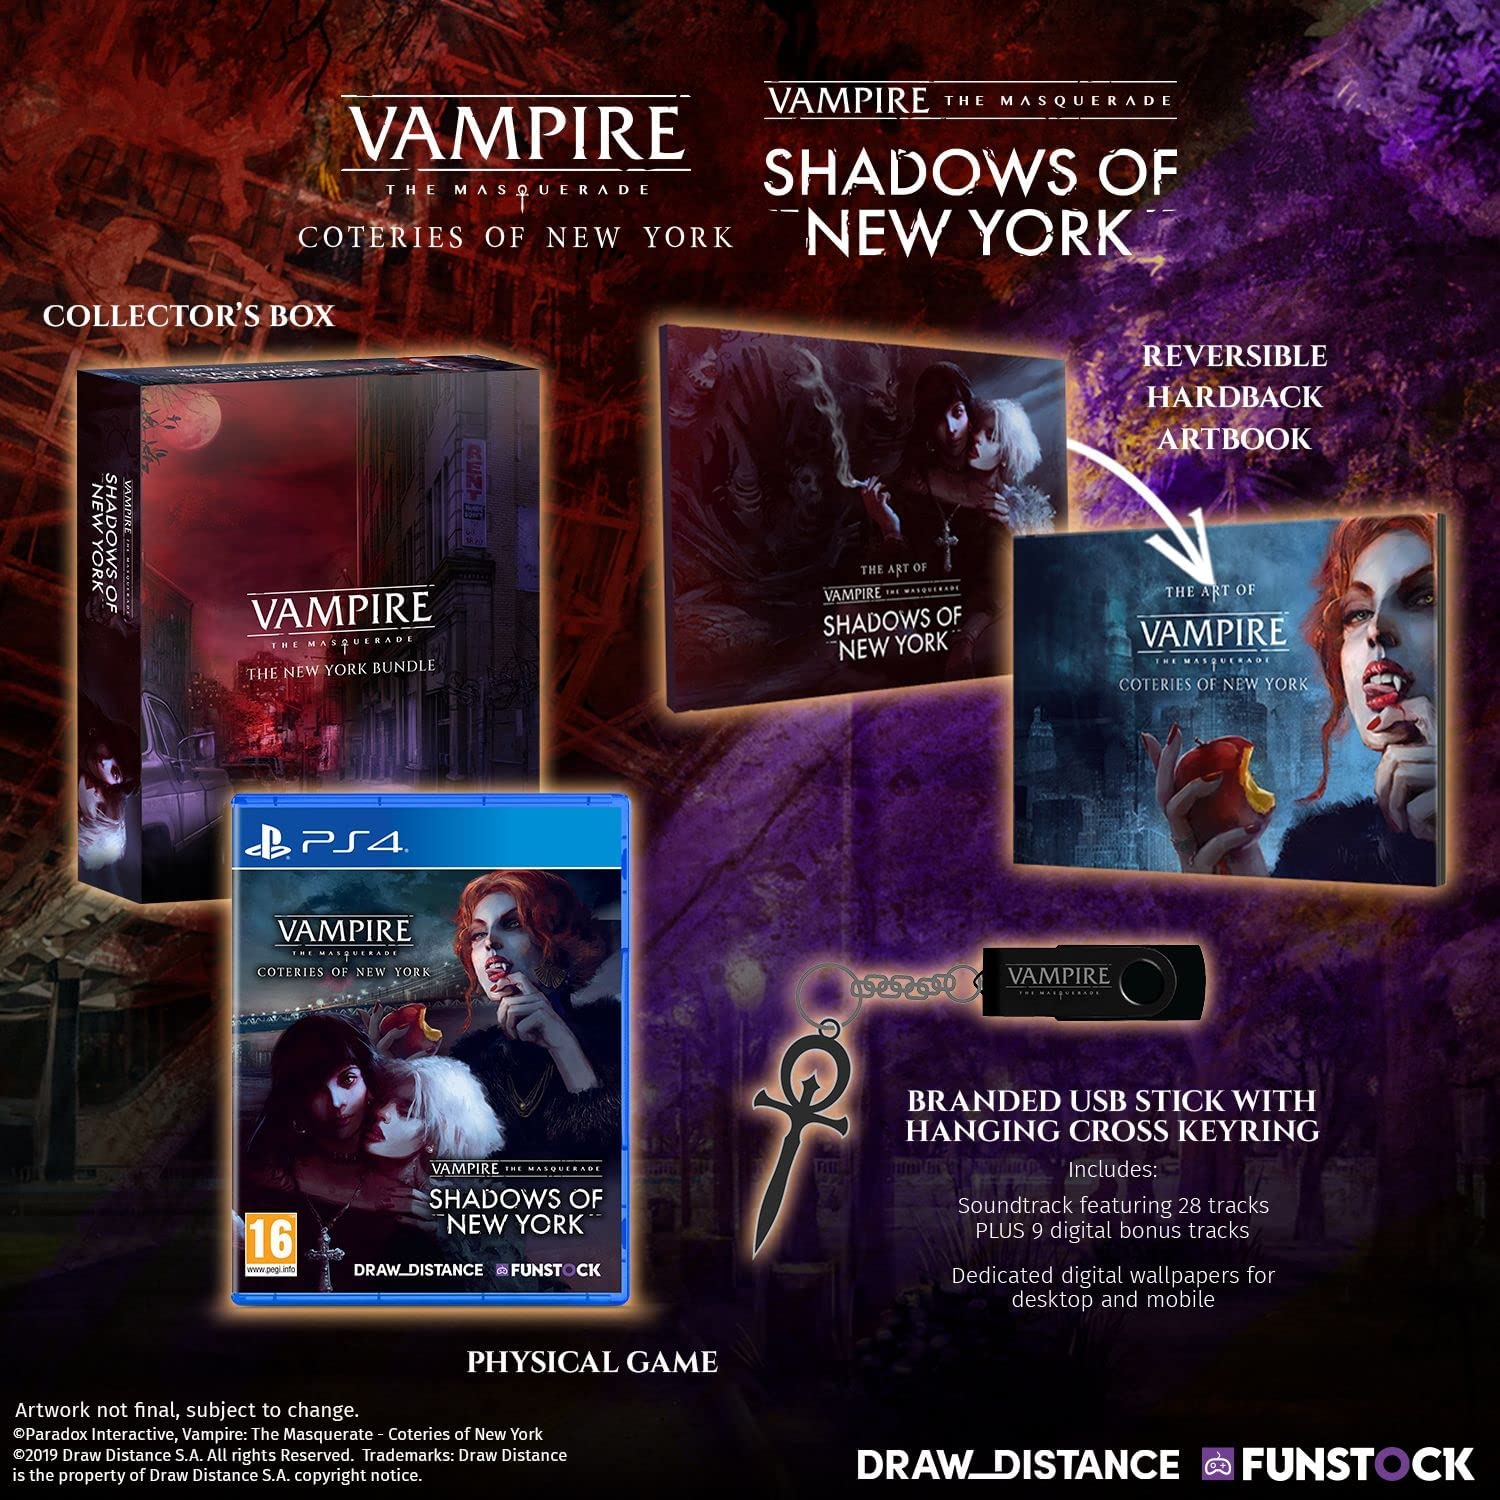 vampire-the-masquerade-coteries-of-new-york-shadows-of-new-york-collectors-edition-1-01